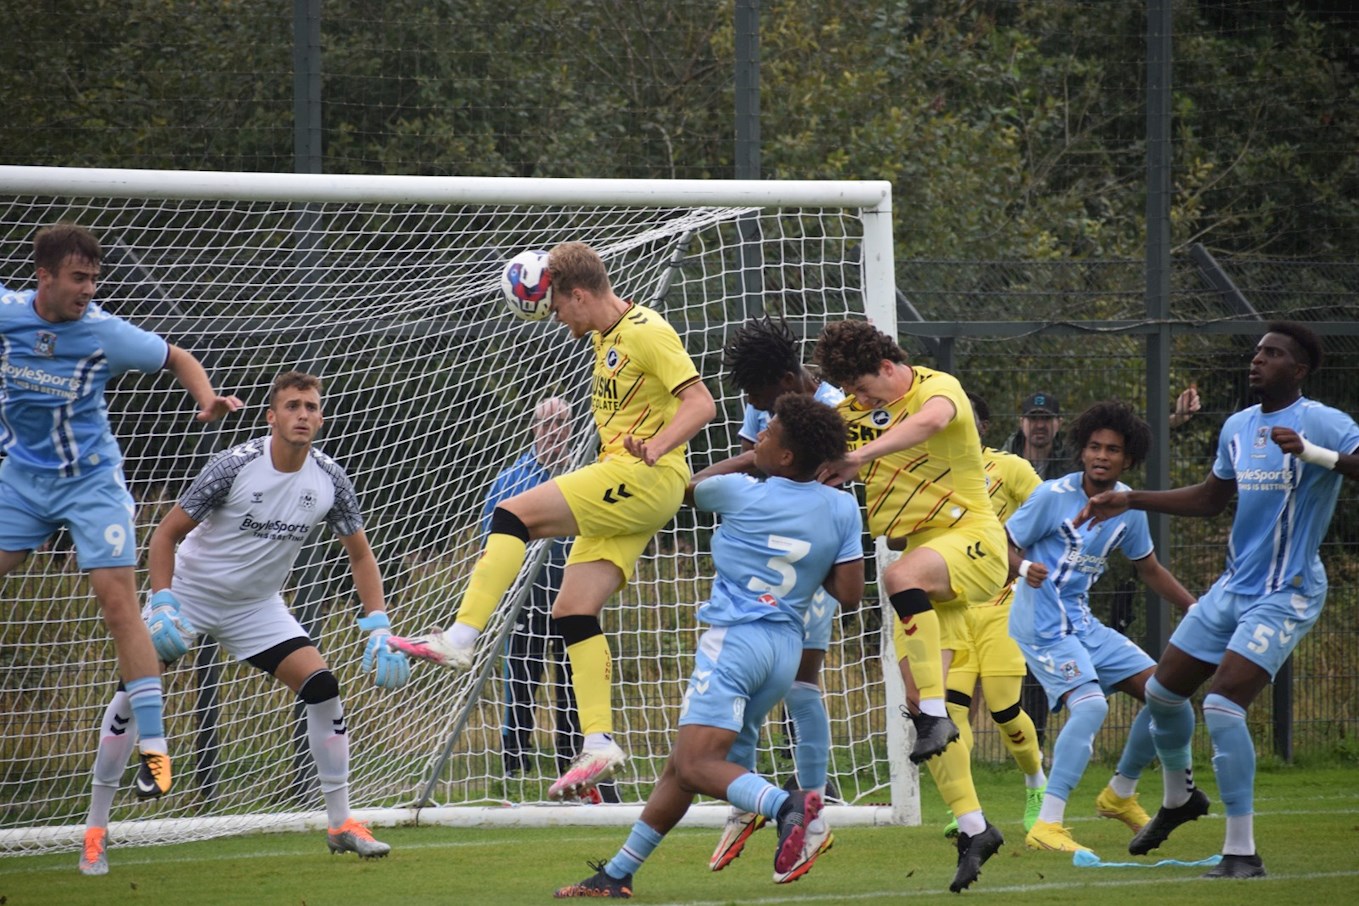 PREVIEW: City U23s host Millwall U23s this afternoon - News - Coventry City